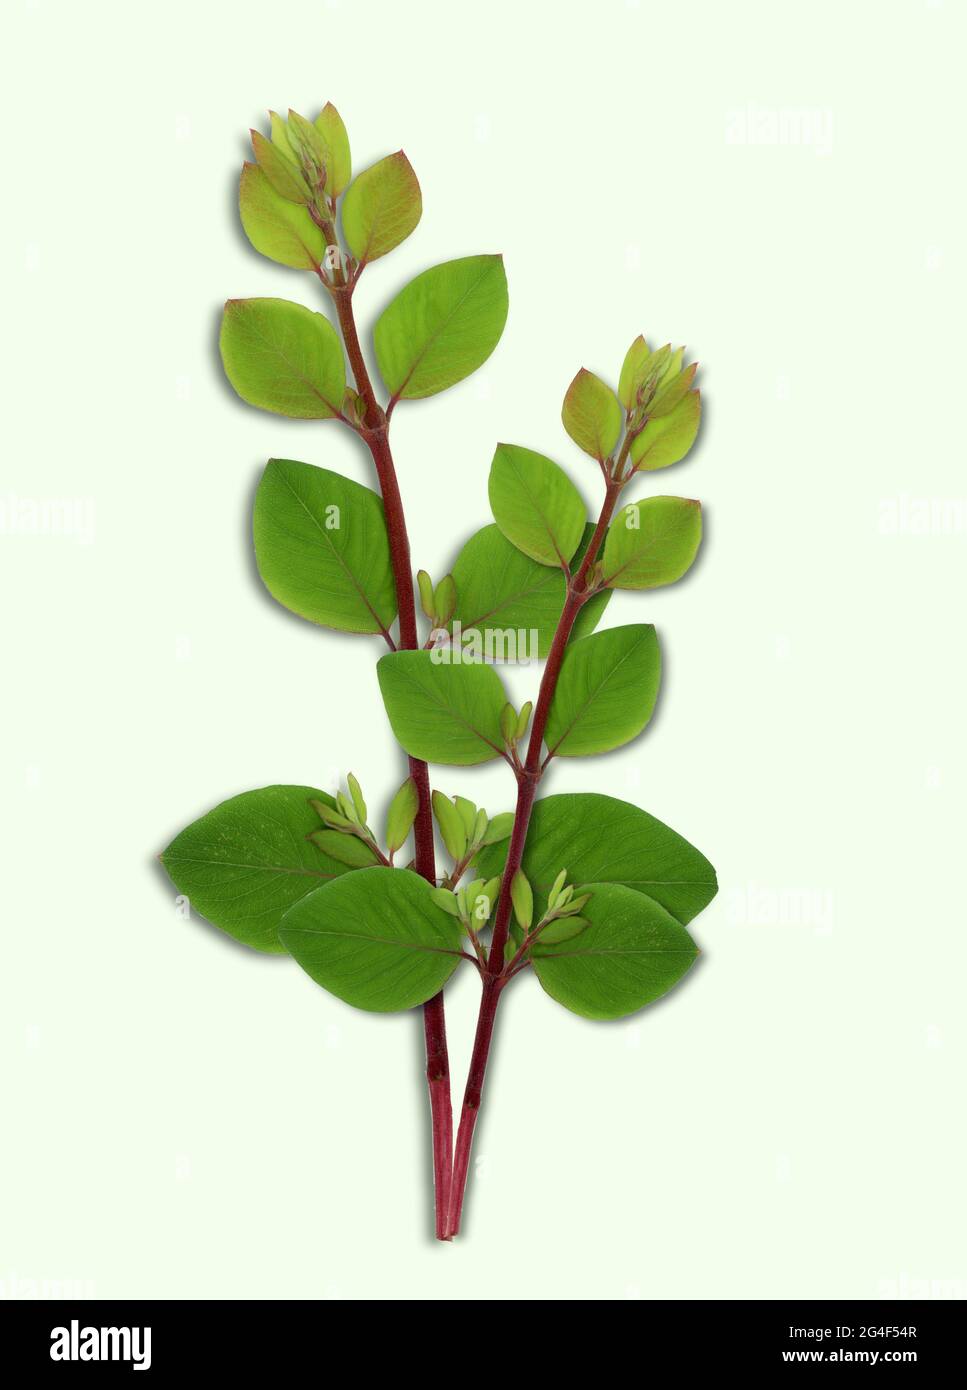 Two branches of a shrubs with little green leafs. Cut out on a light green background Stock Photo